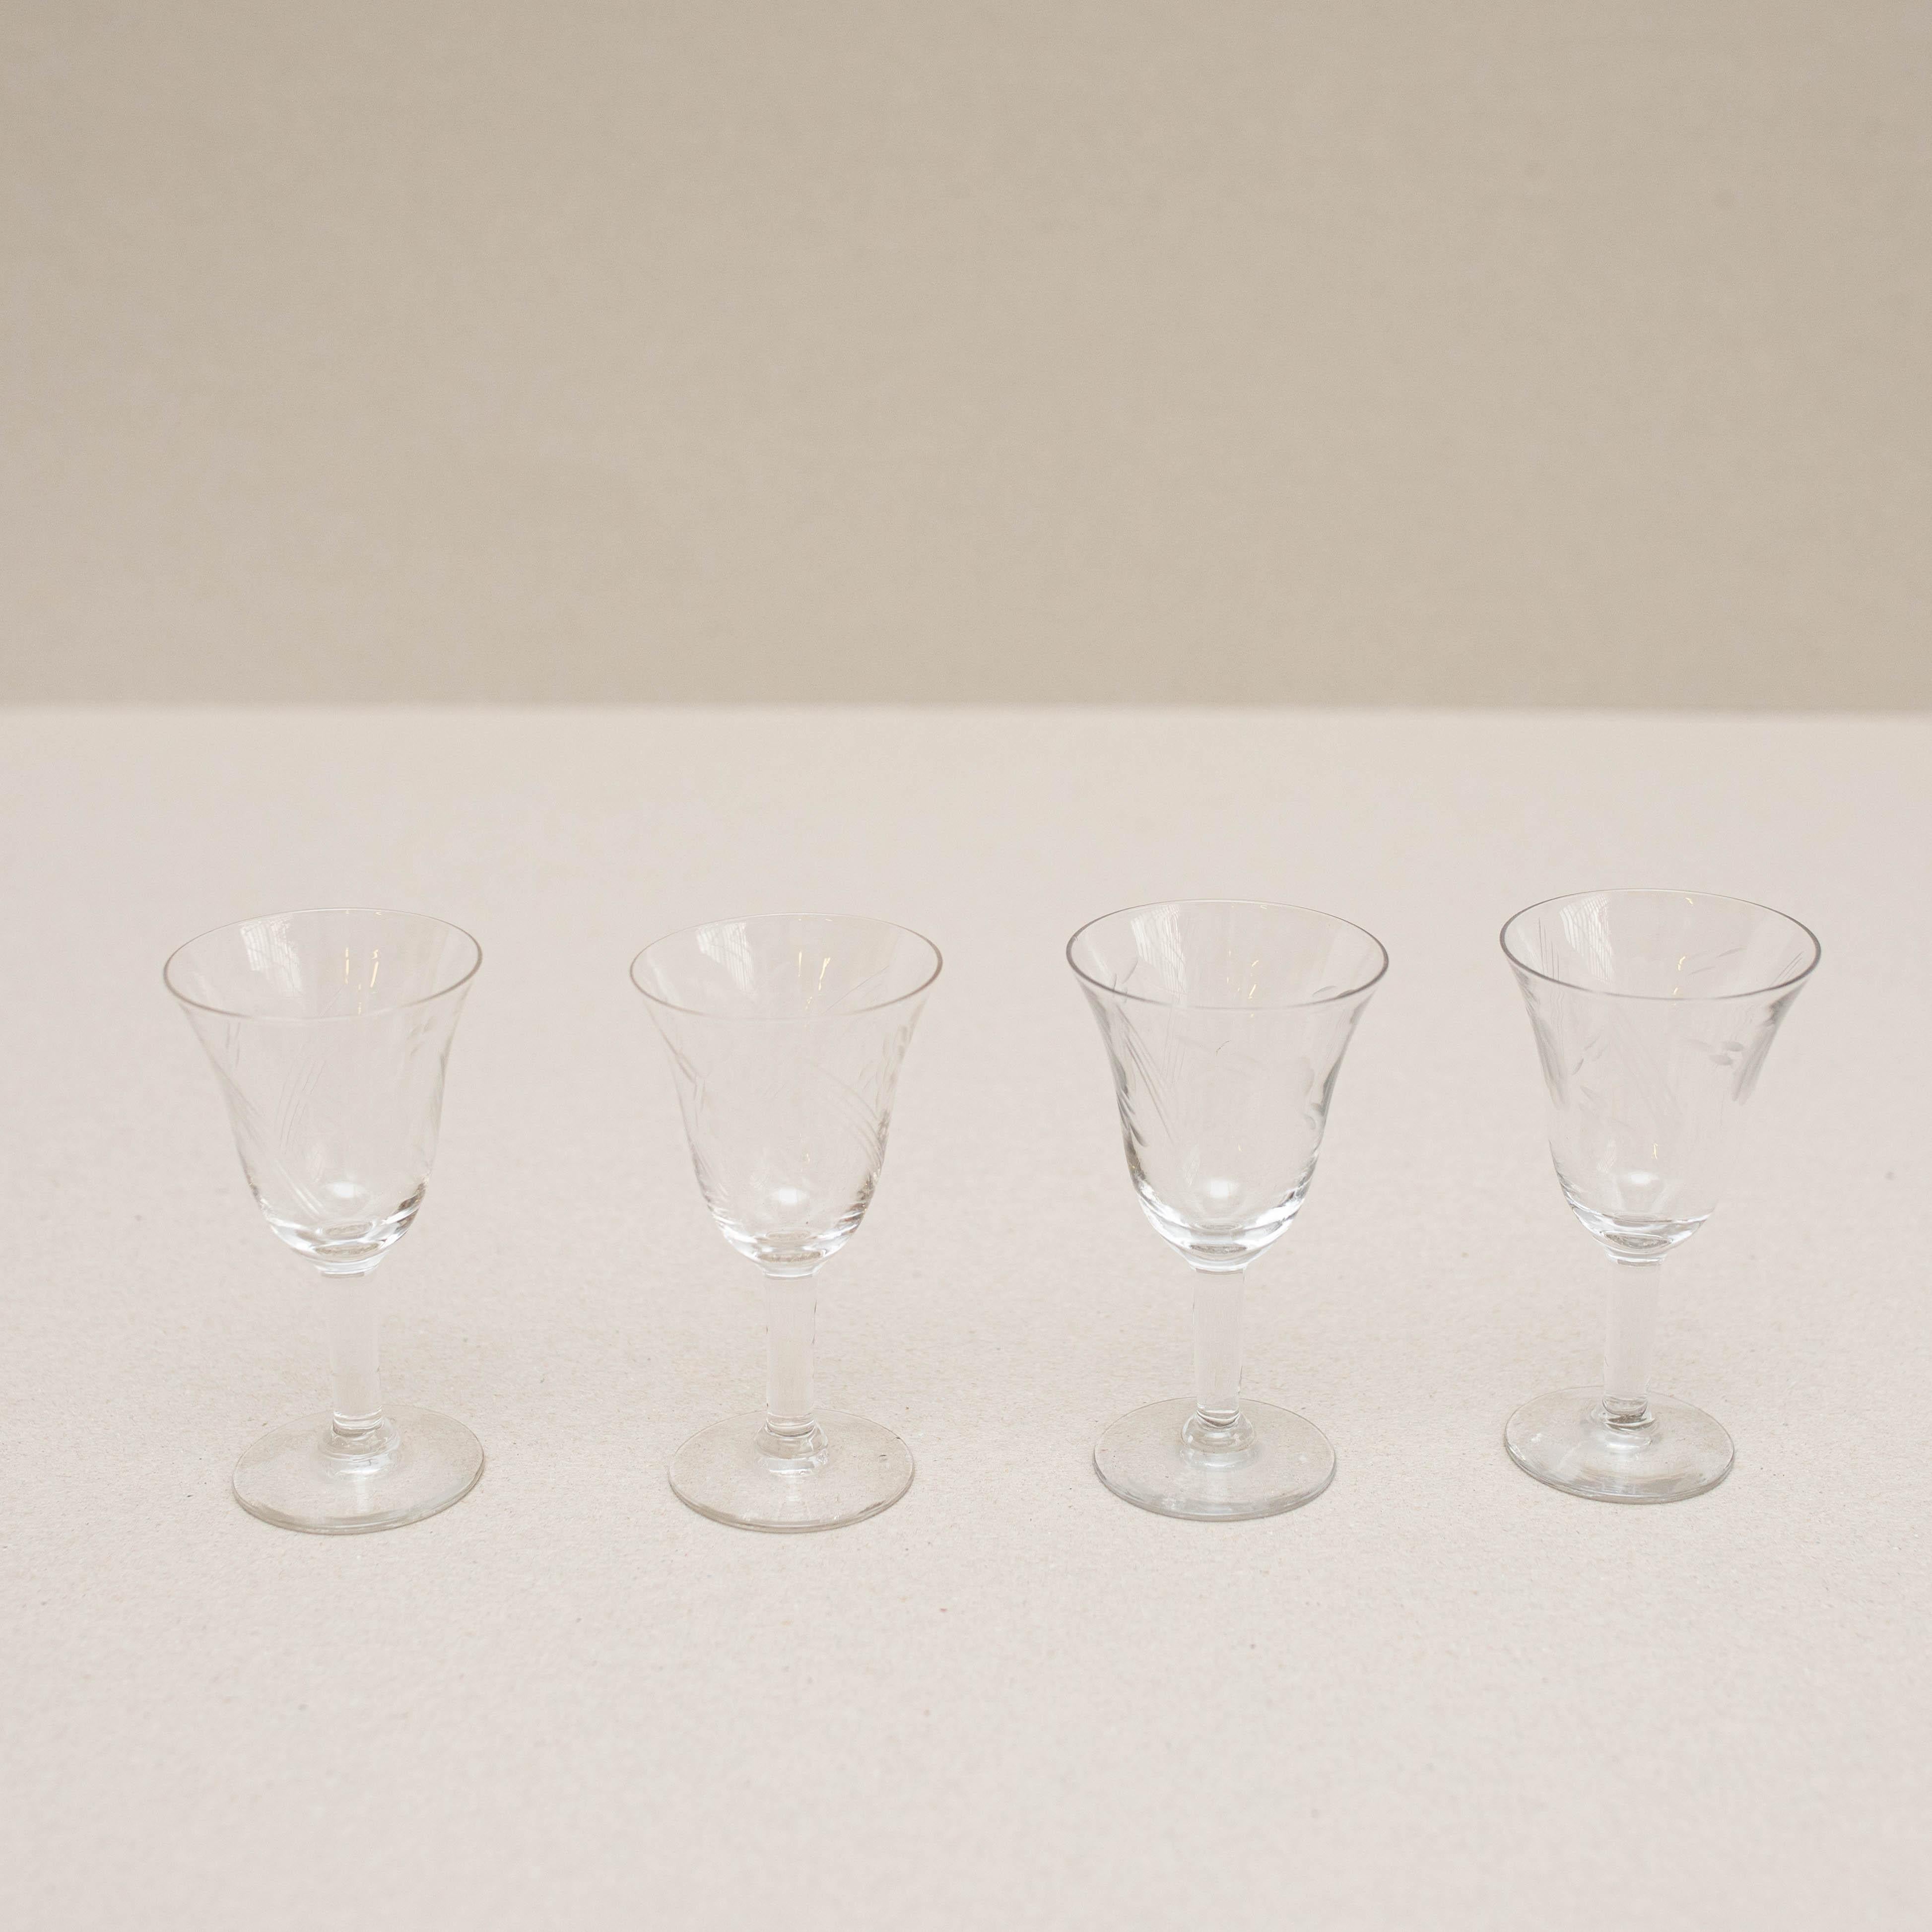 Set of 4 antique glass wine cups.

Made by unknown manufacturer in Spain, circa 1940.

In original condition, with minor wear consistent with age and use, preserving a beautiful patina.

Materials:
Glass

Dimensions:
H 11.30cm 
Ø